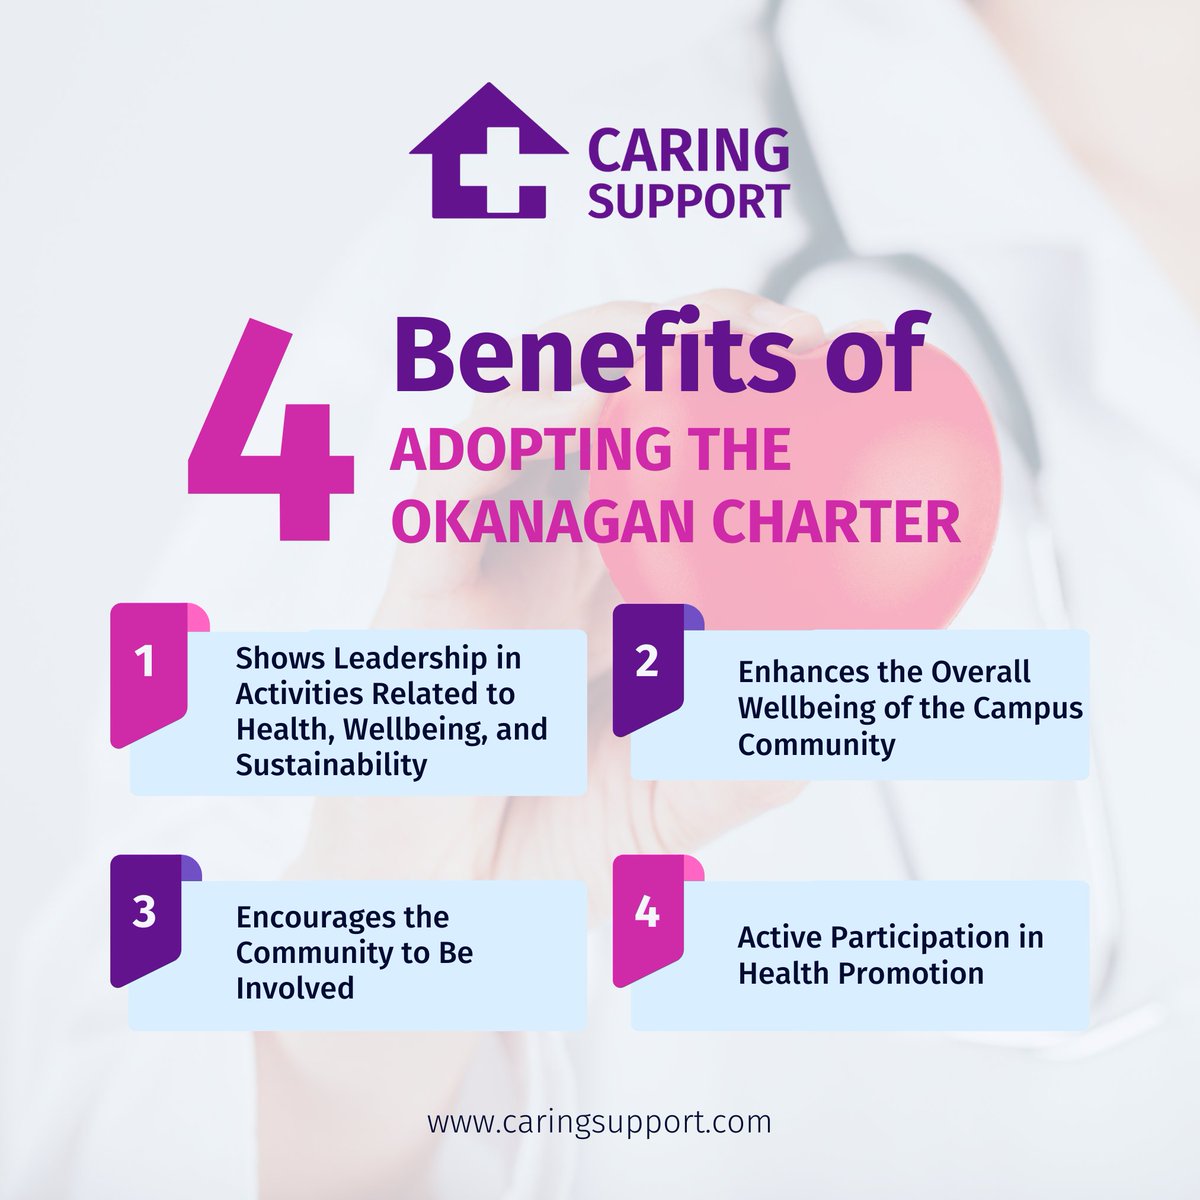 Exploring the journey to holistic wellbeing in higher education 📚💪. Discover how Canadian universities are leading the way with the Okanagan Charter to promote health and wellness on campus. 

caringsupport.com/blog/healthy-m…

#HealthPromotion #OkanaganCharter #CanadianUniversities